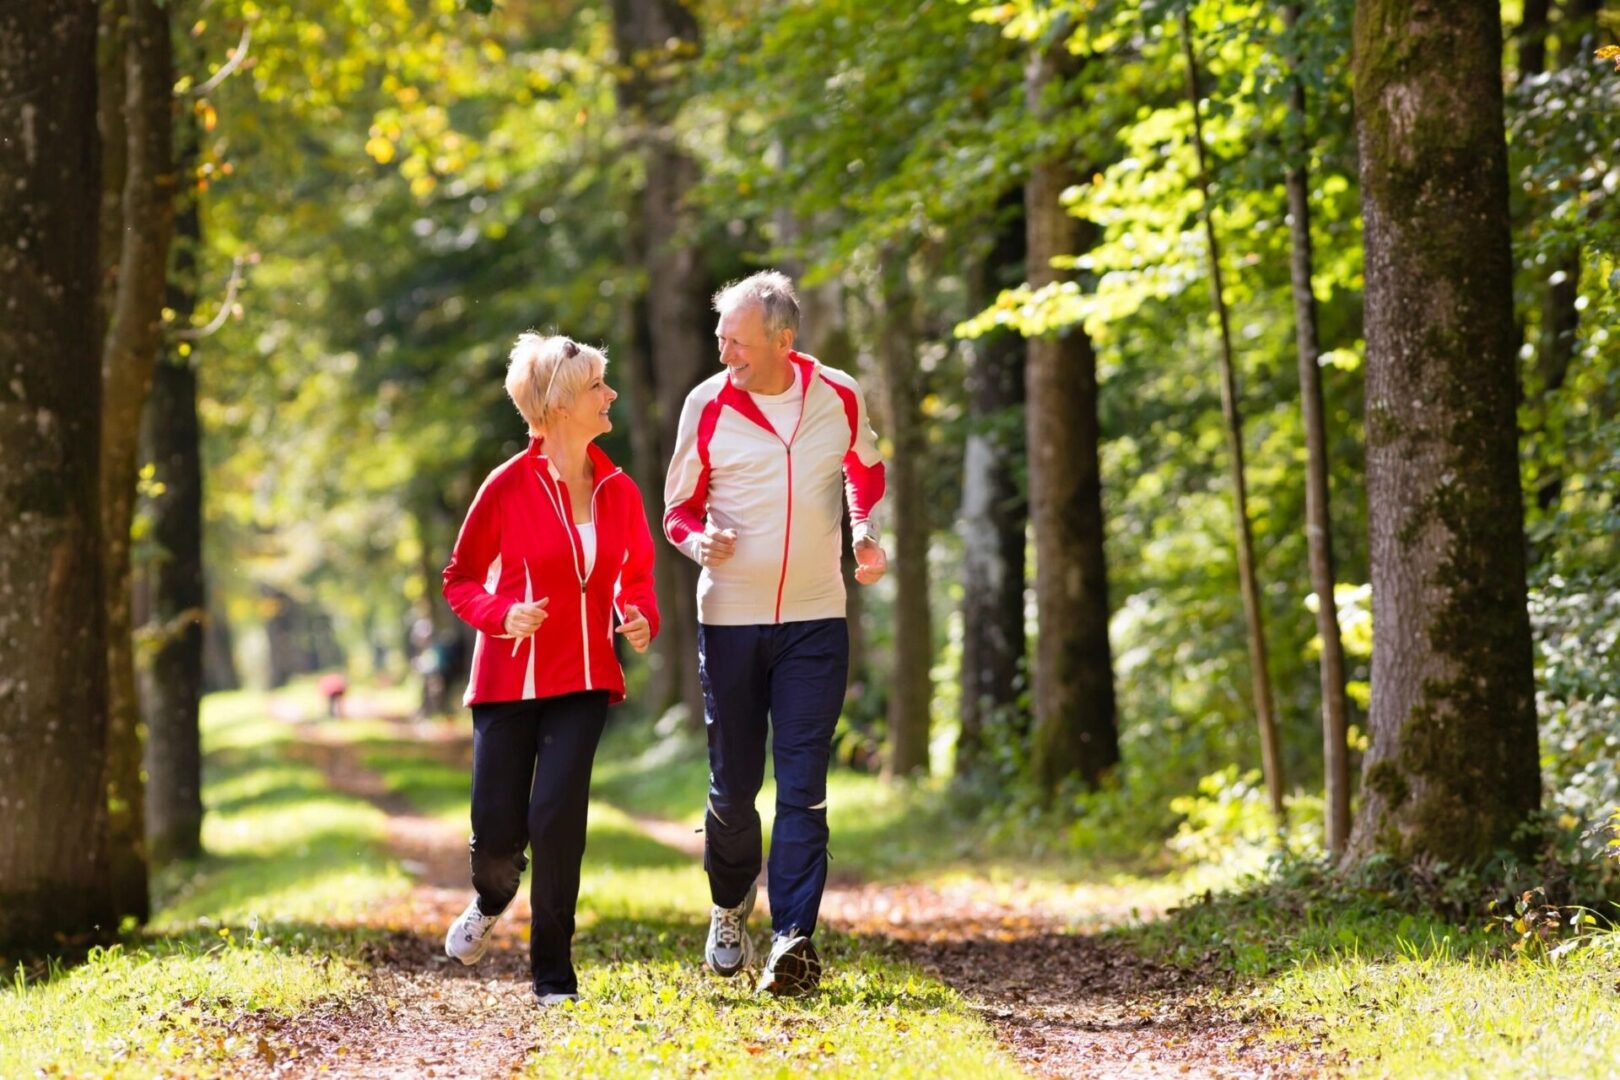 Two older women walking down a path in the woods.